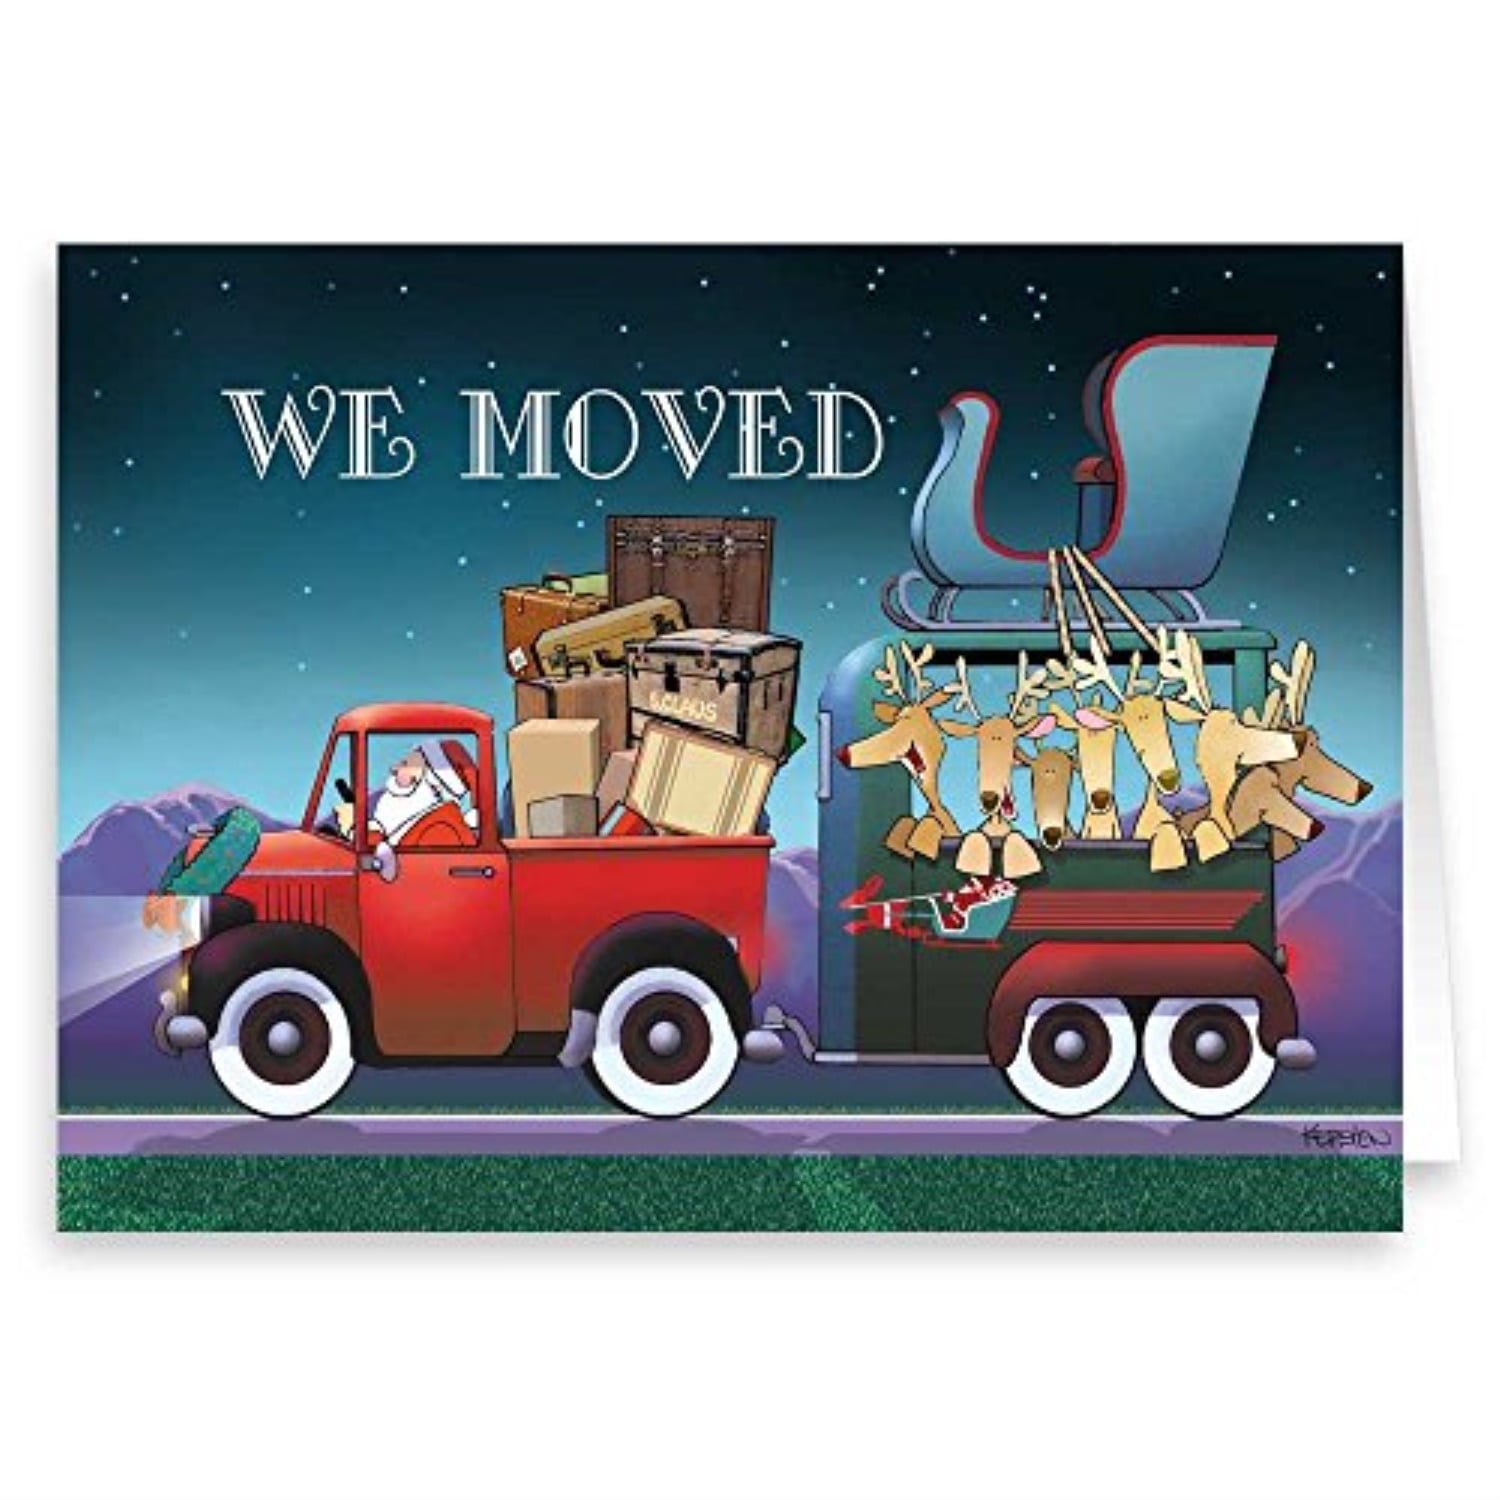 personalized - we moved/new address holiday card 24 cards & envelopes - funny bulk new address